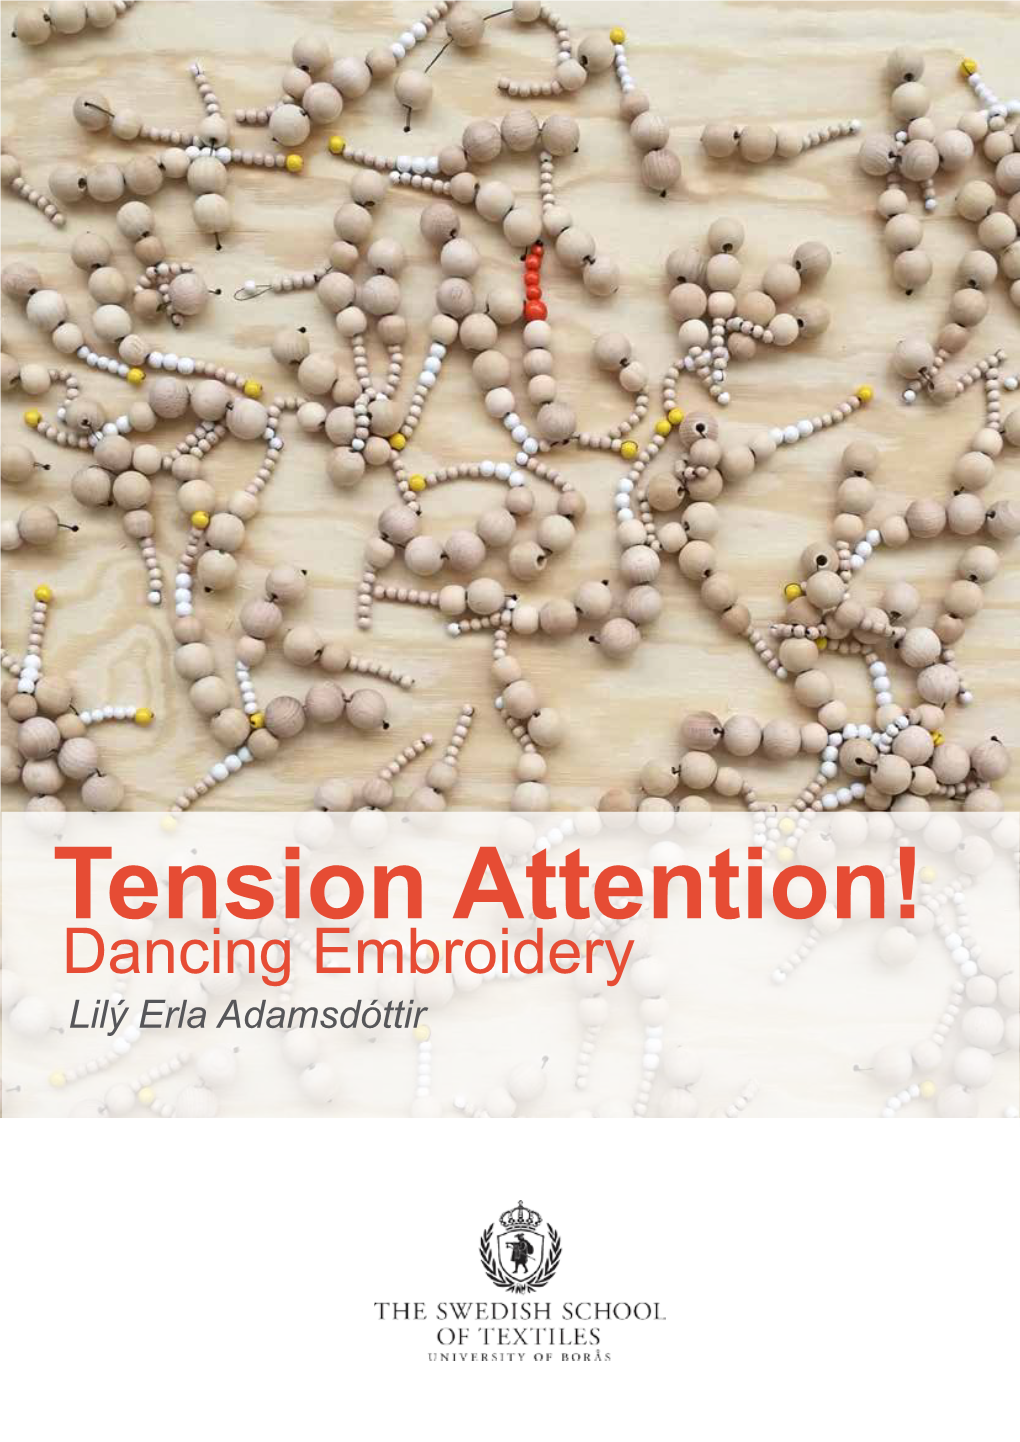 Tension Attention! Dancing Embroidery